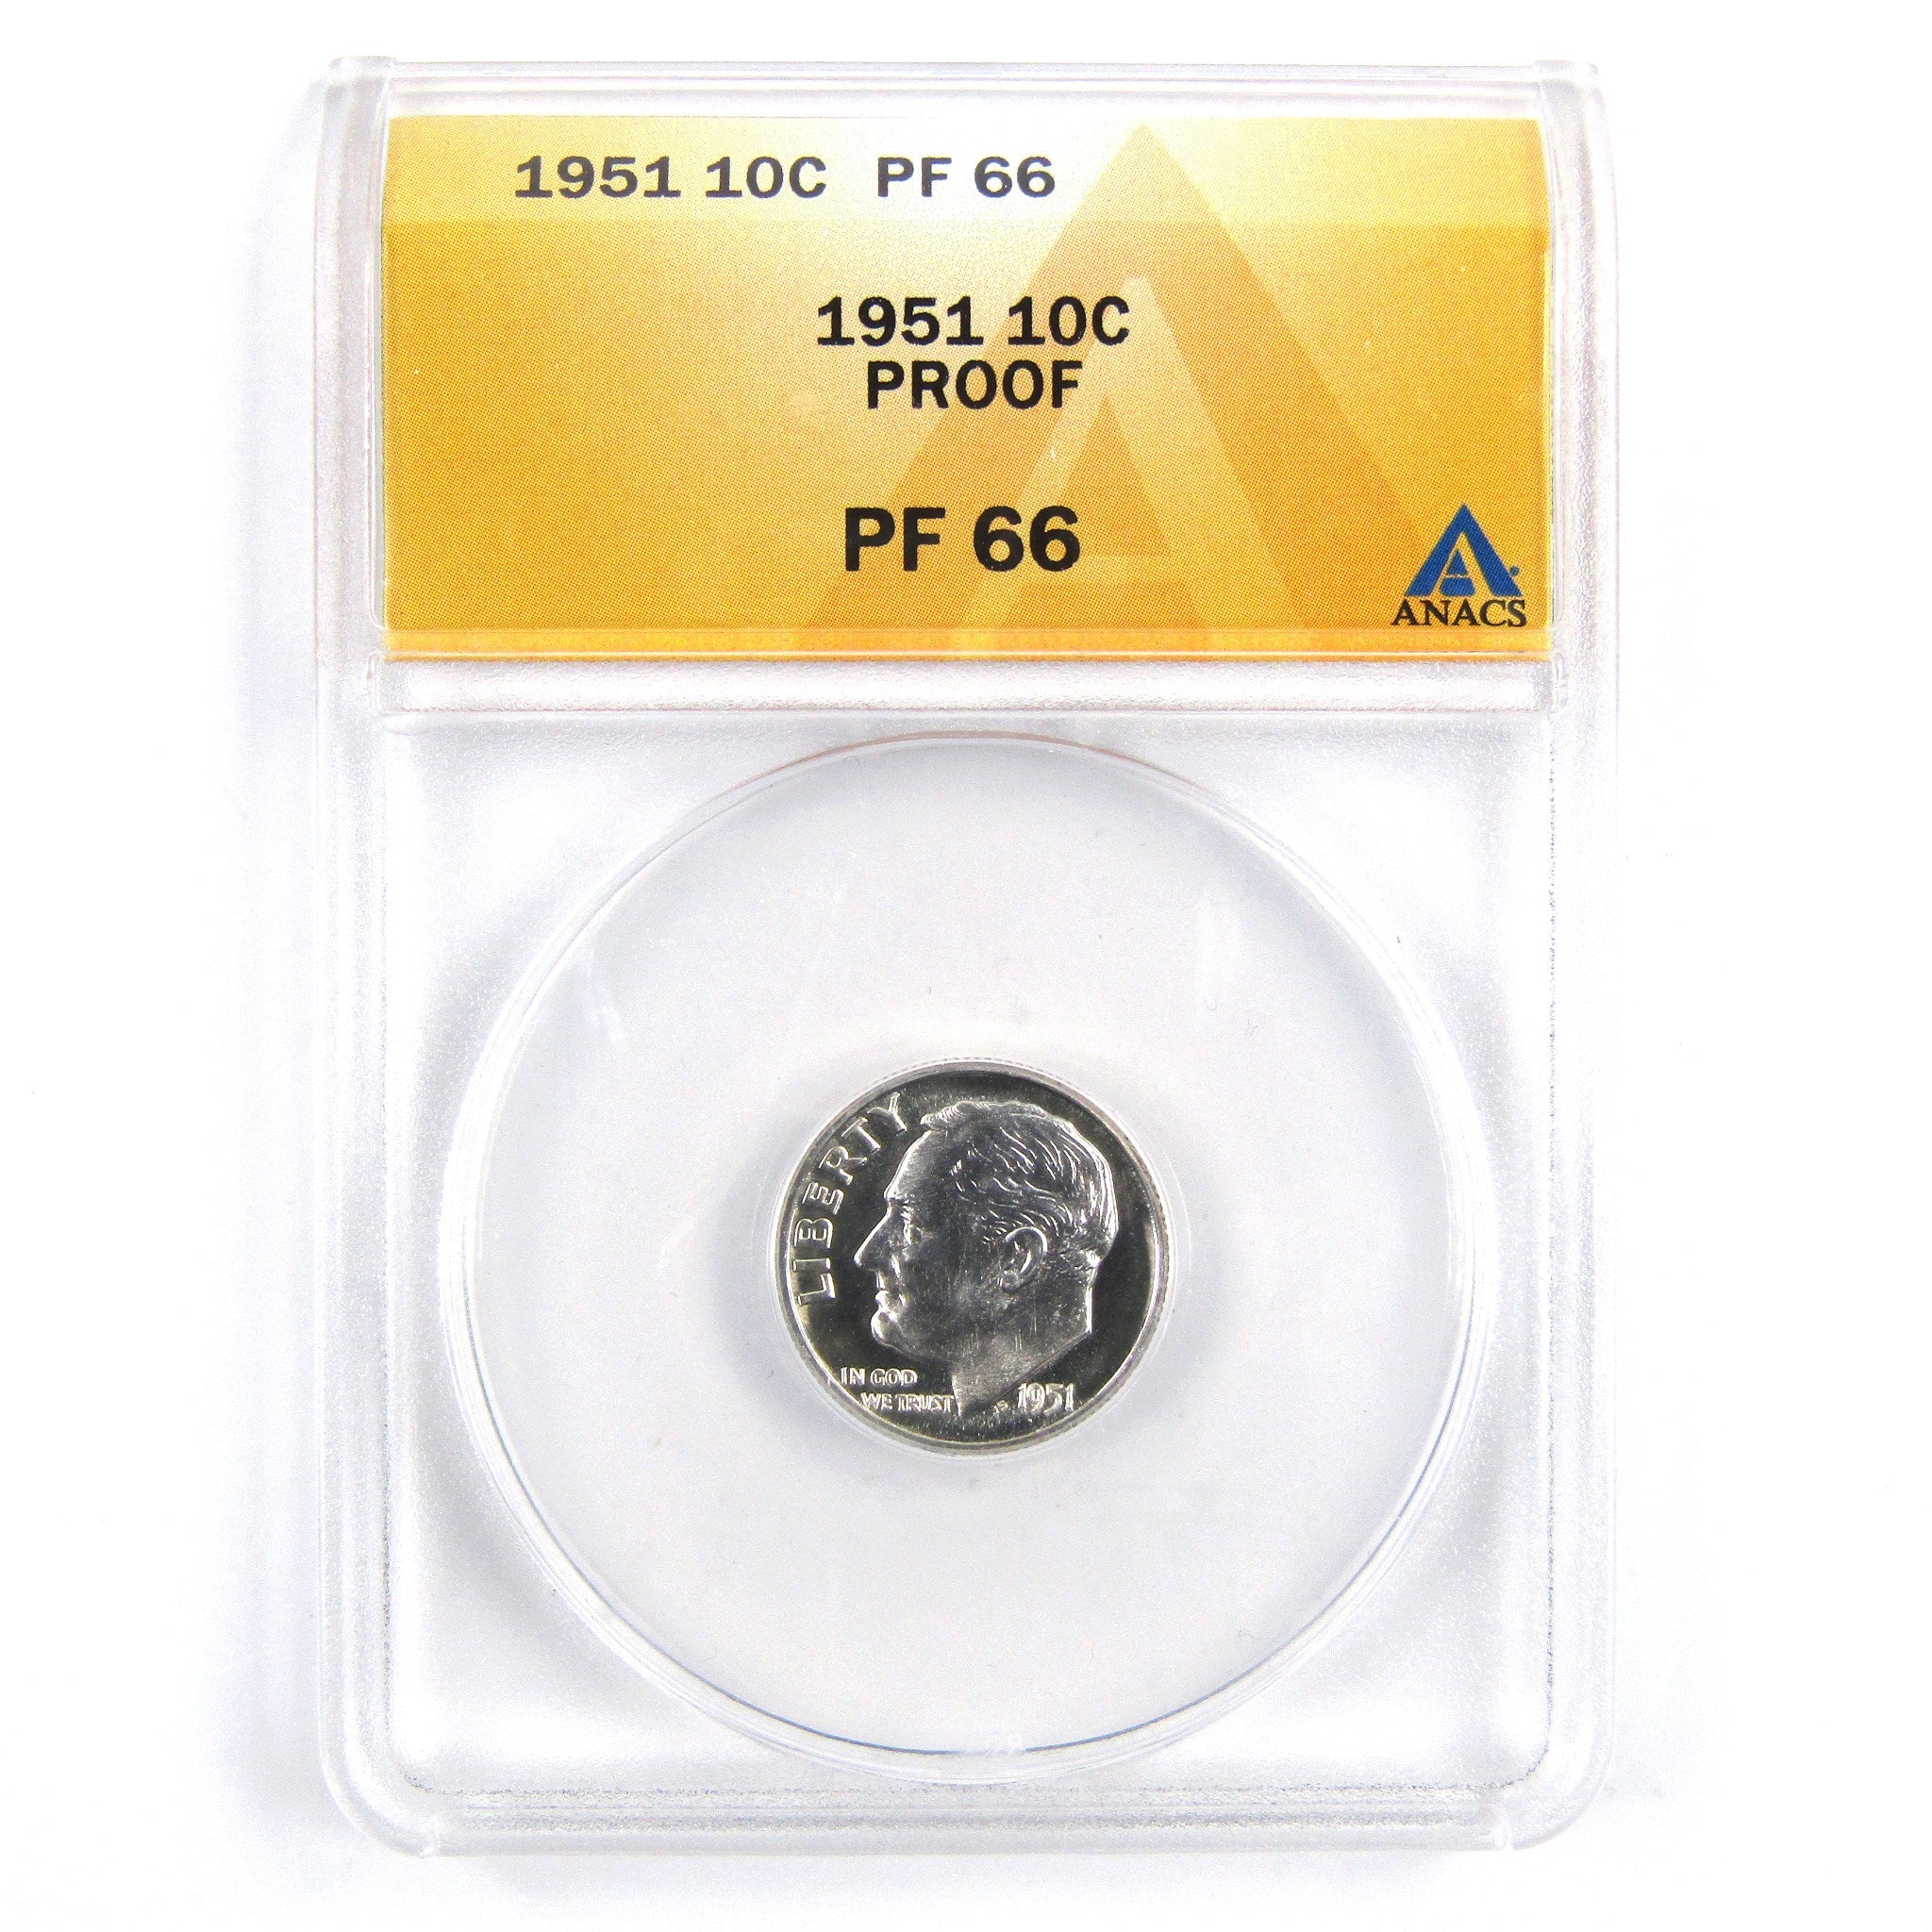 1951 Roosevelt Dime PF 66 ANACS 90% Silver 10c Proof Coin SKU:CPC2403